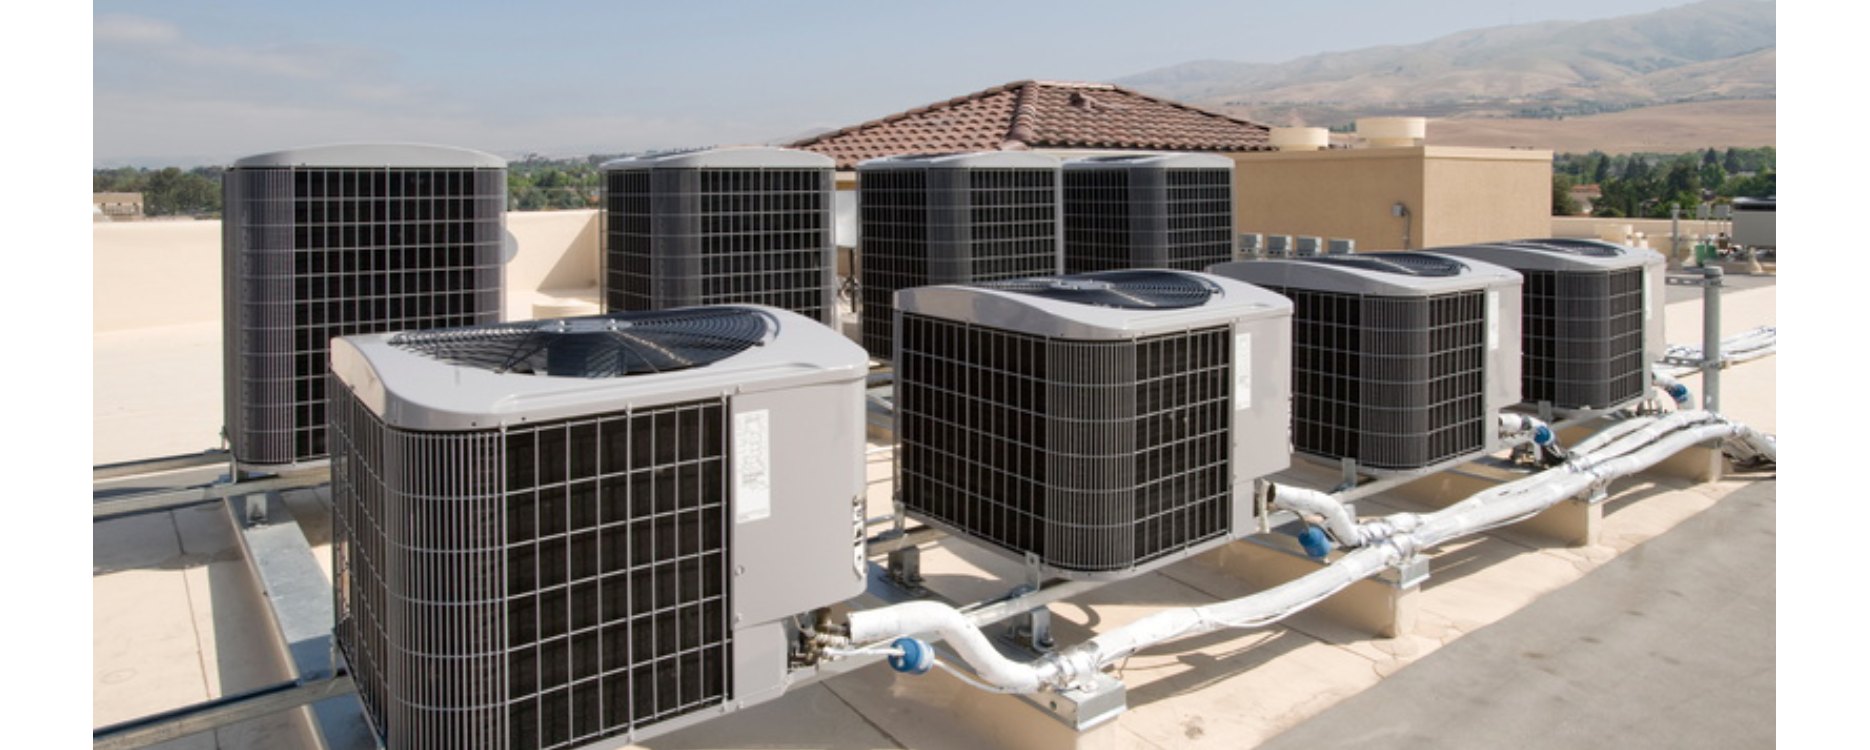 Air Conditioner on the Roof | Rooftop Air Conditioning Unit